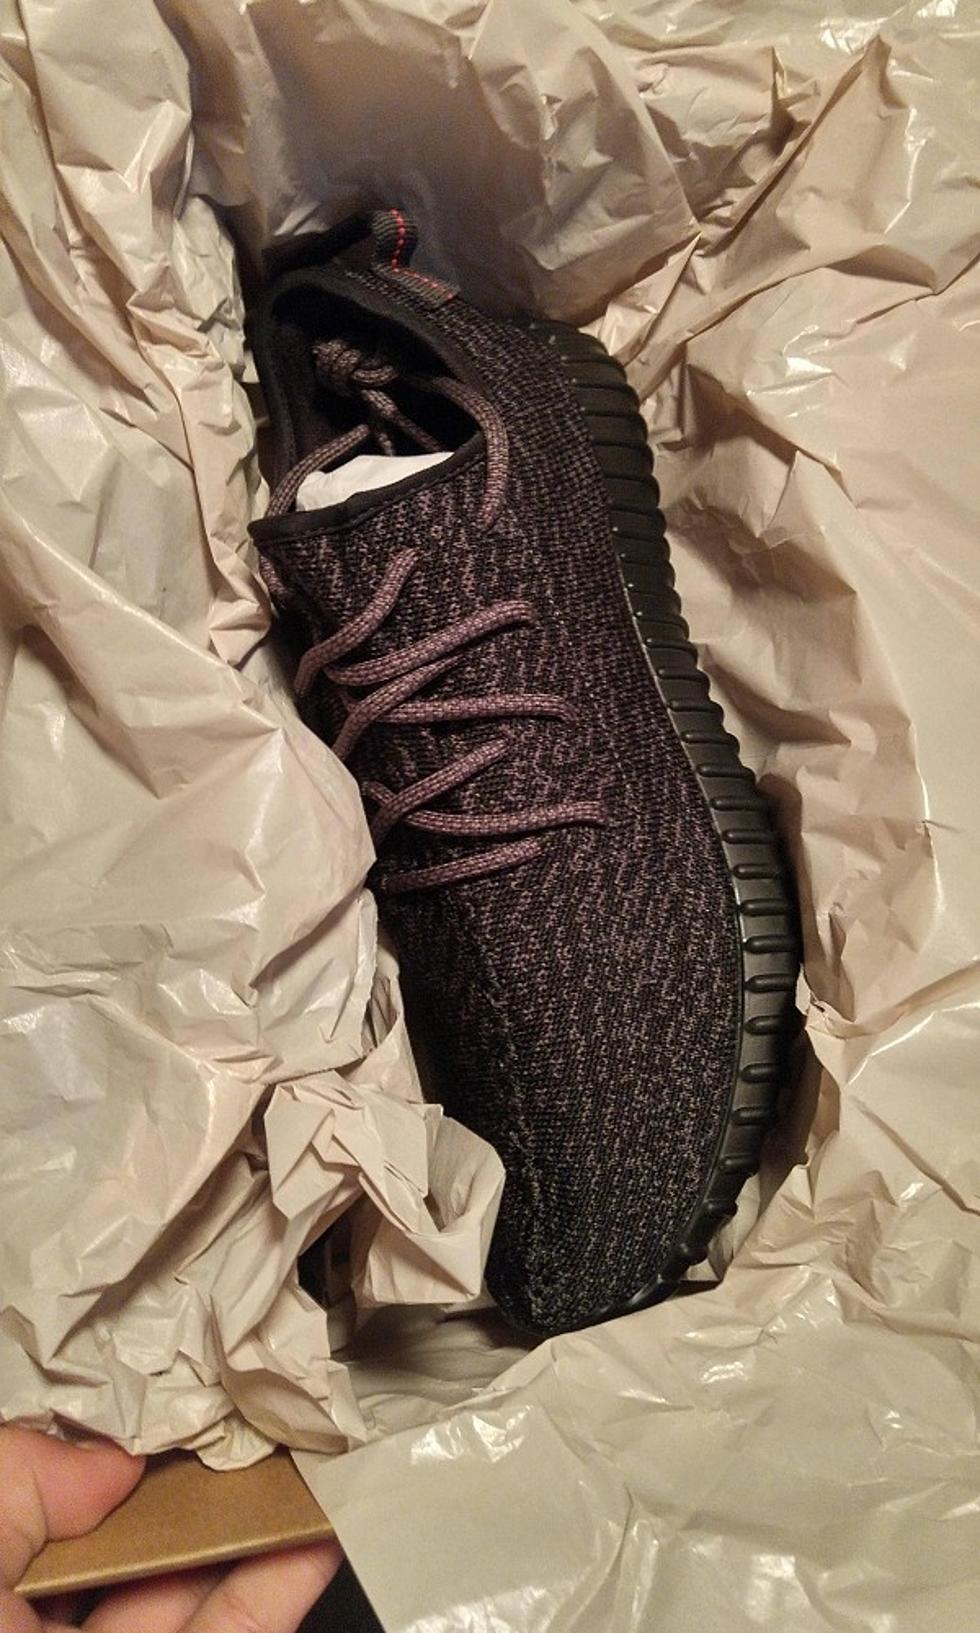 Kanye West Sent This Guy Free Yeezys for Guessing 'T.L.O.P' - XXL